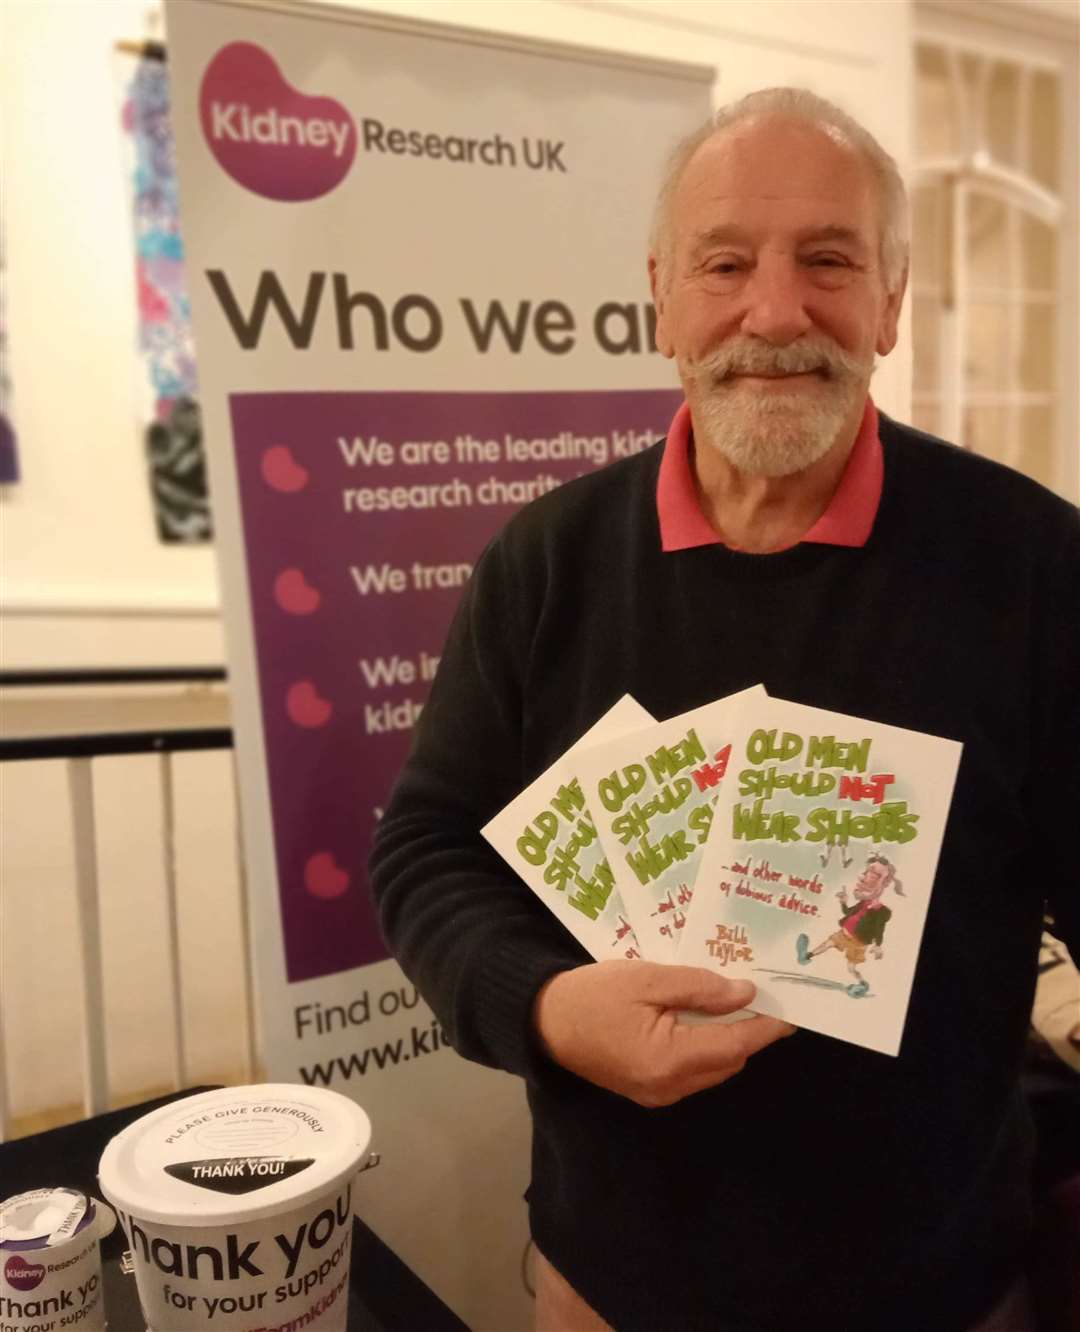 Bill Taylor with copies of his book, Old Men Should Not Wear Shorts